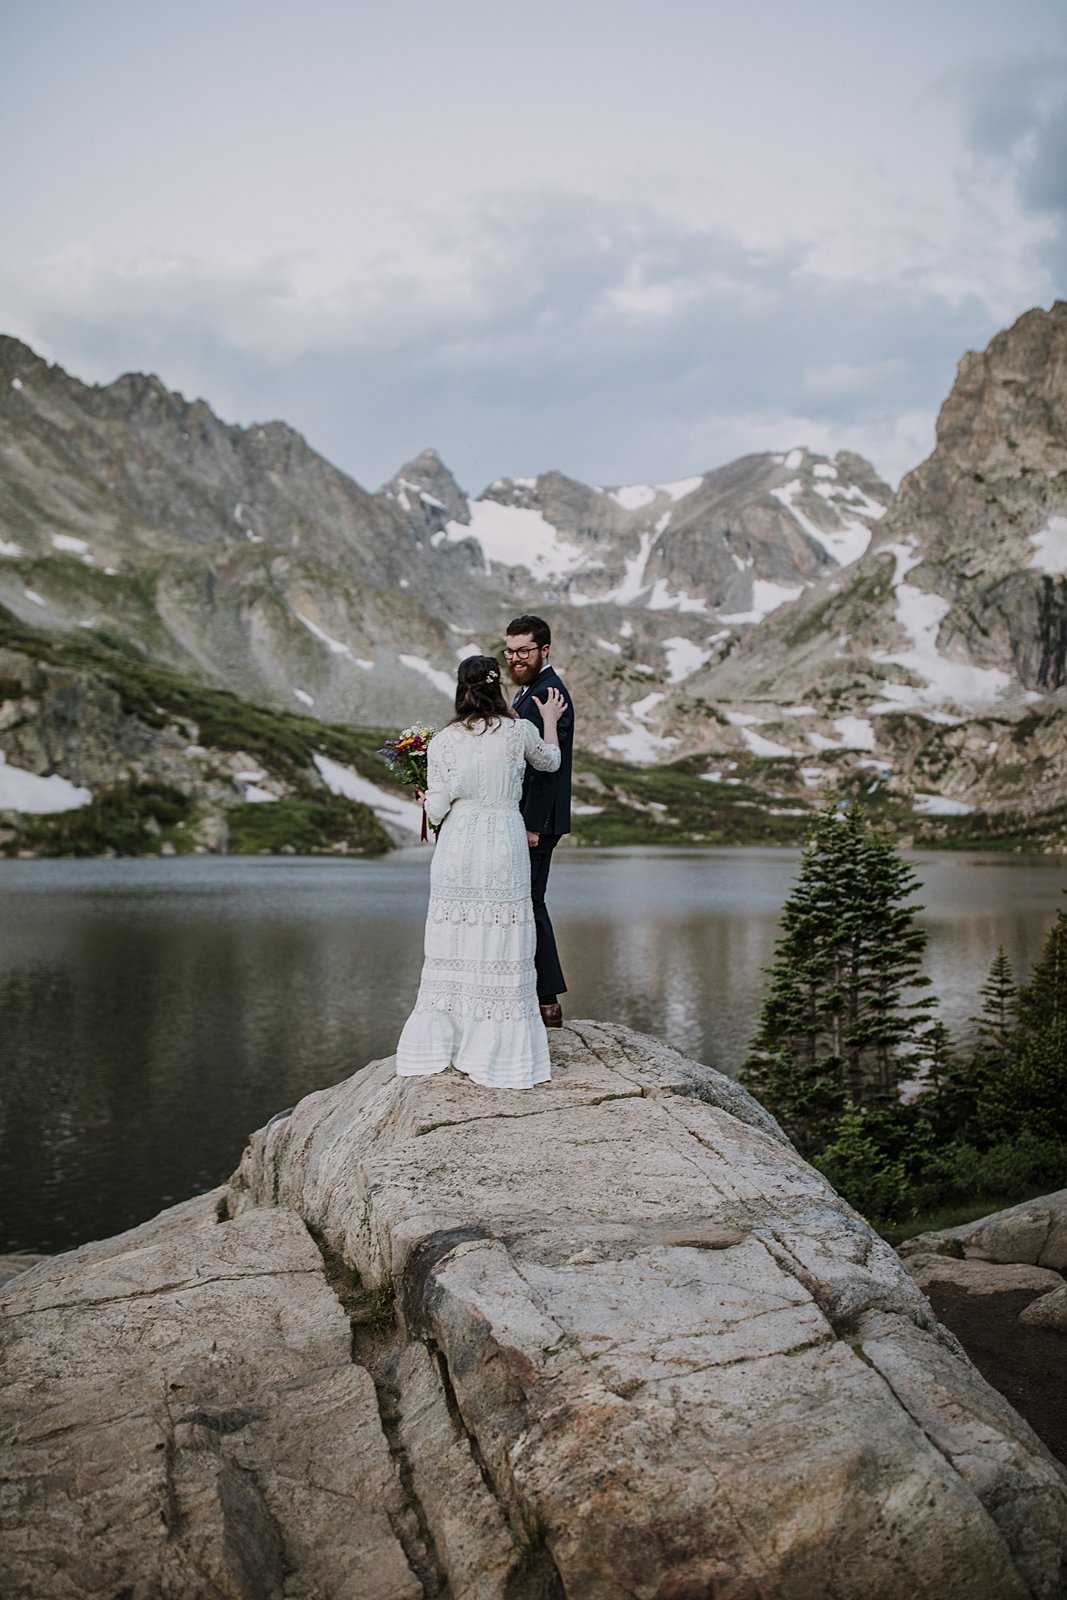 bride and groom elopement first look, bride and groom standing on lake shore, indian peaks wilderness, elopement at lake isabelle, backcountry trekking elopement, glacier valley elopement